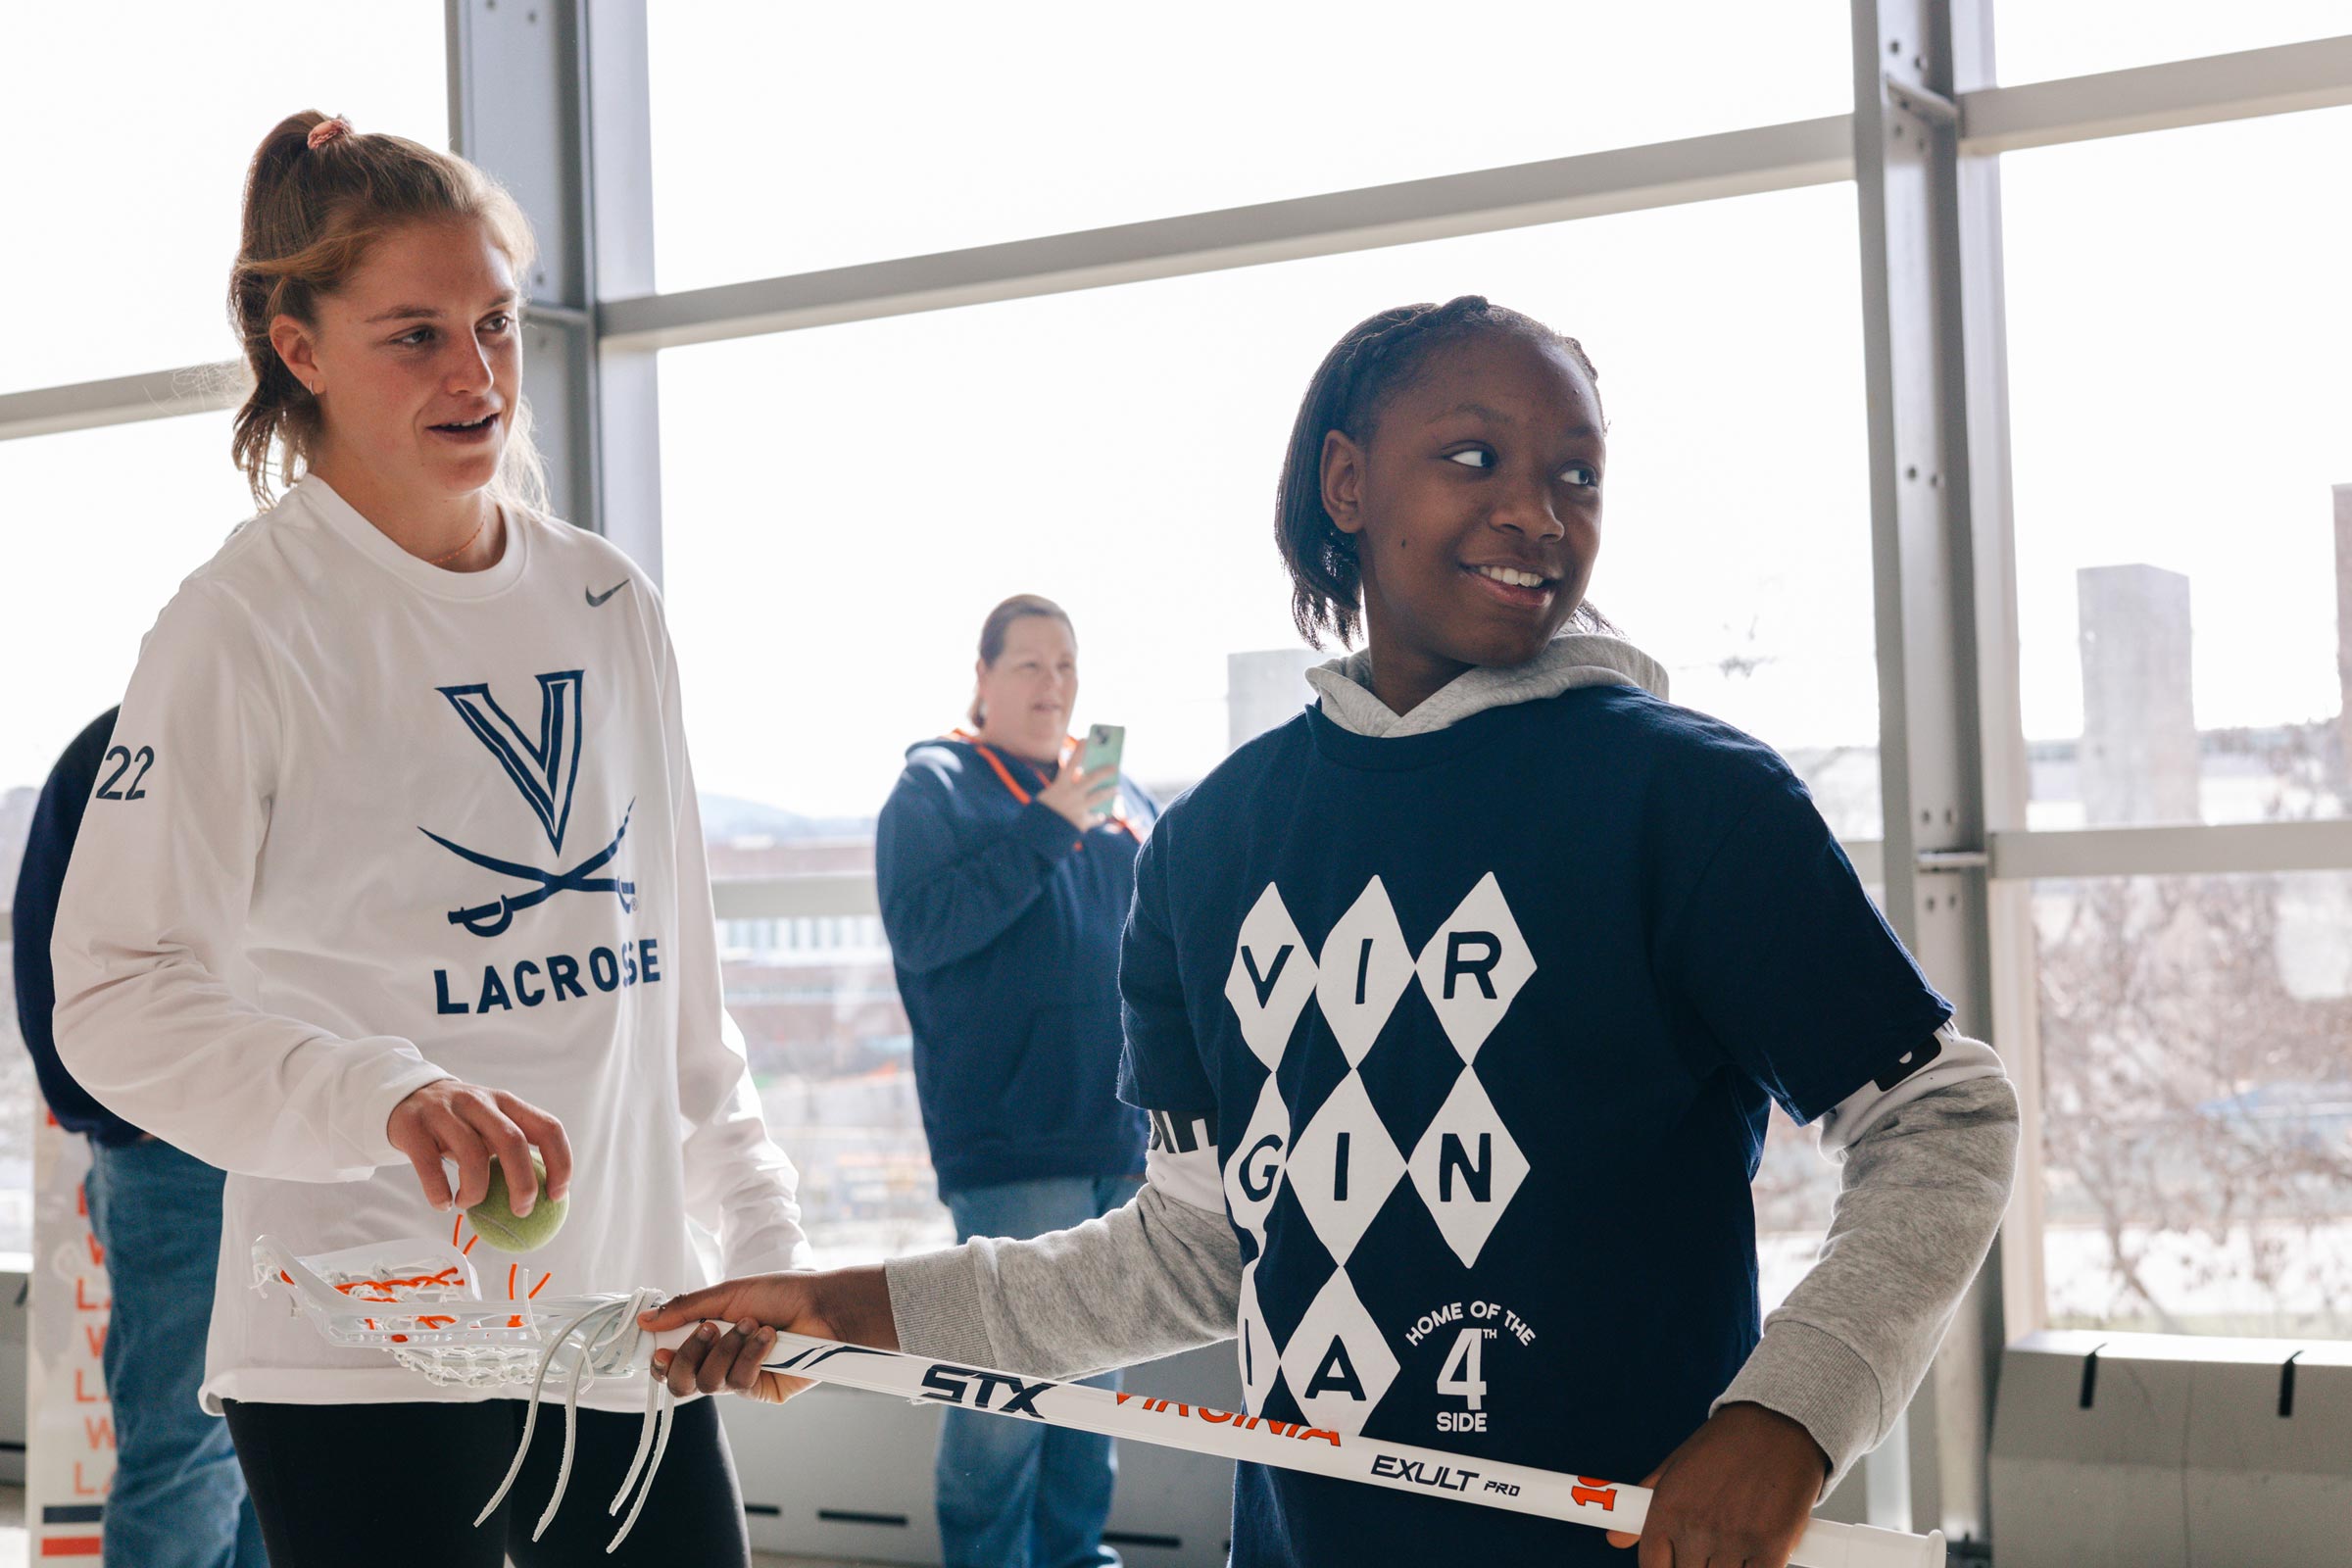 A women's lacrosse member works with a student 